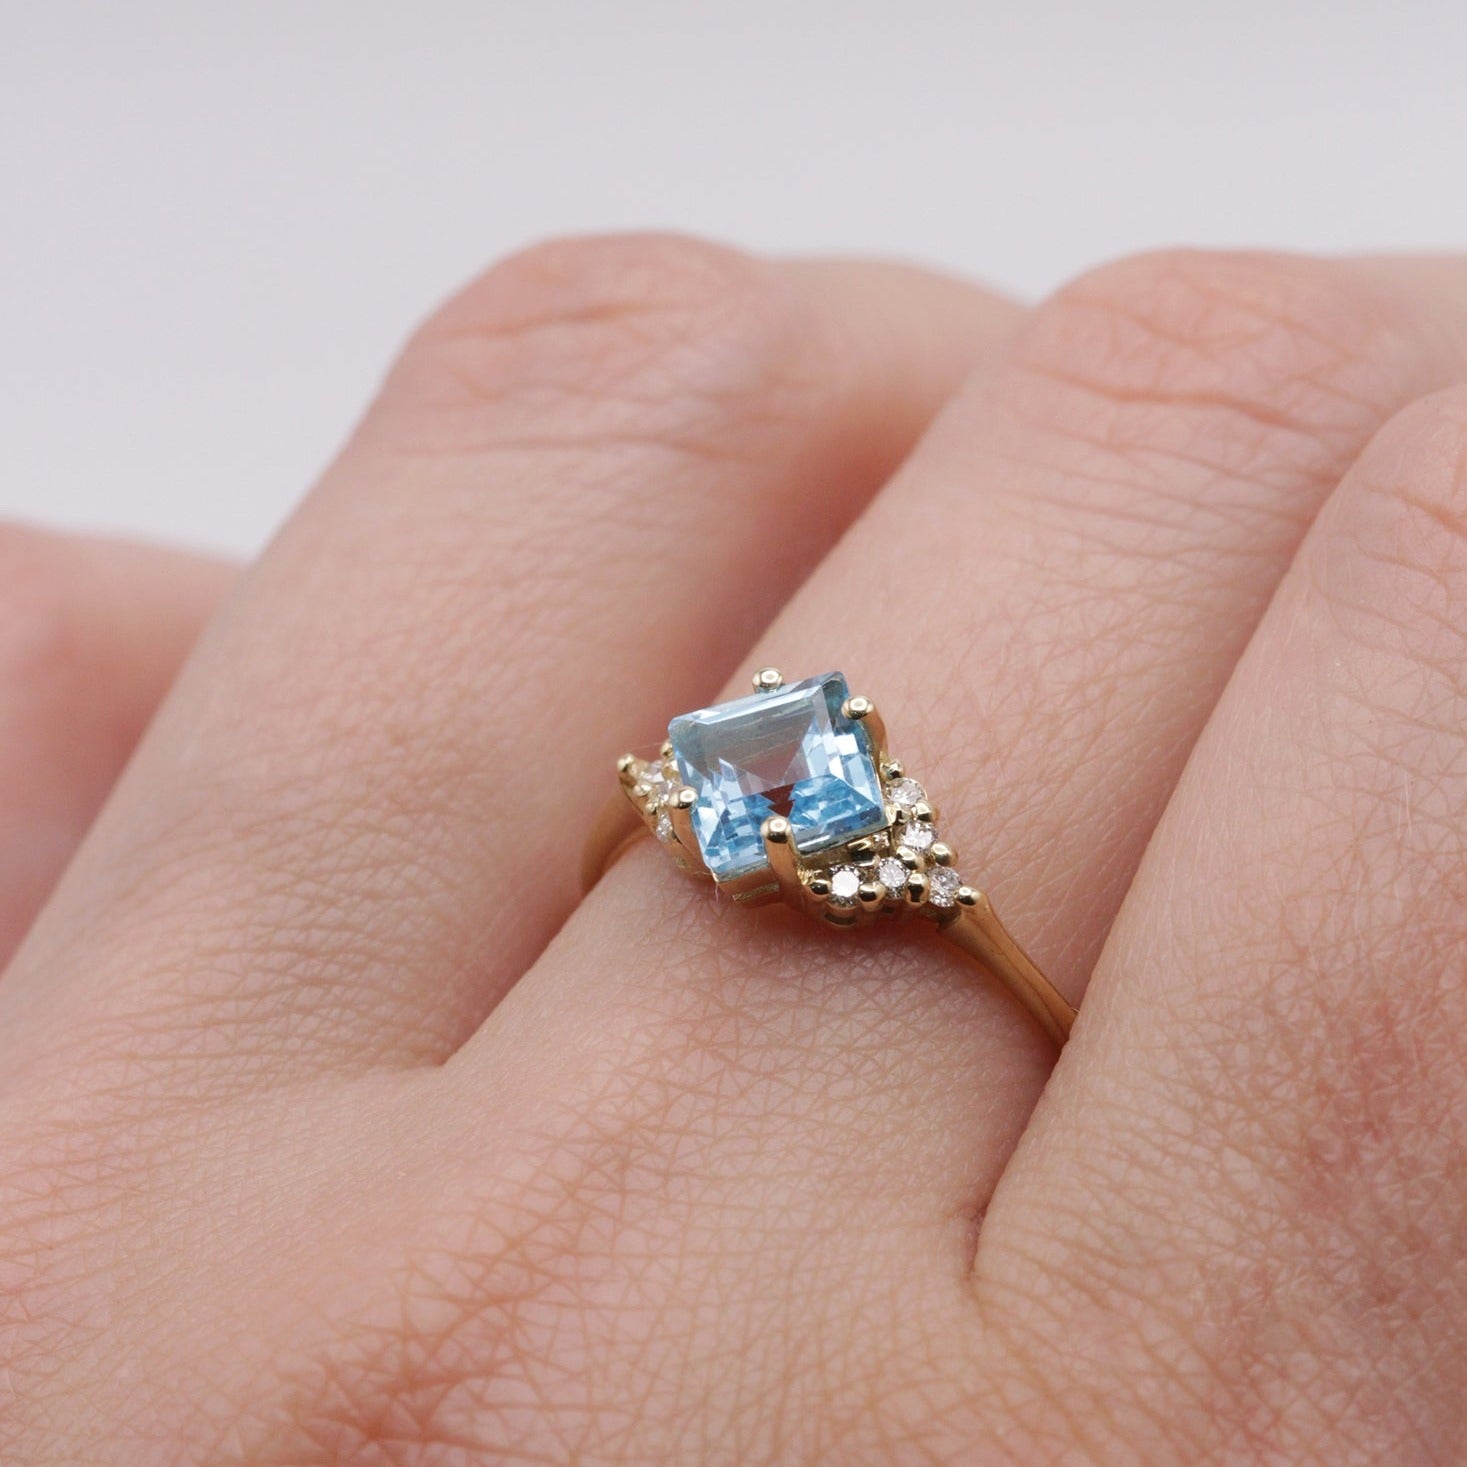 Juliette Ring With Diamonds and Blue Topaz - Swiss